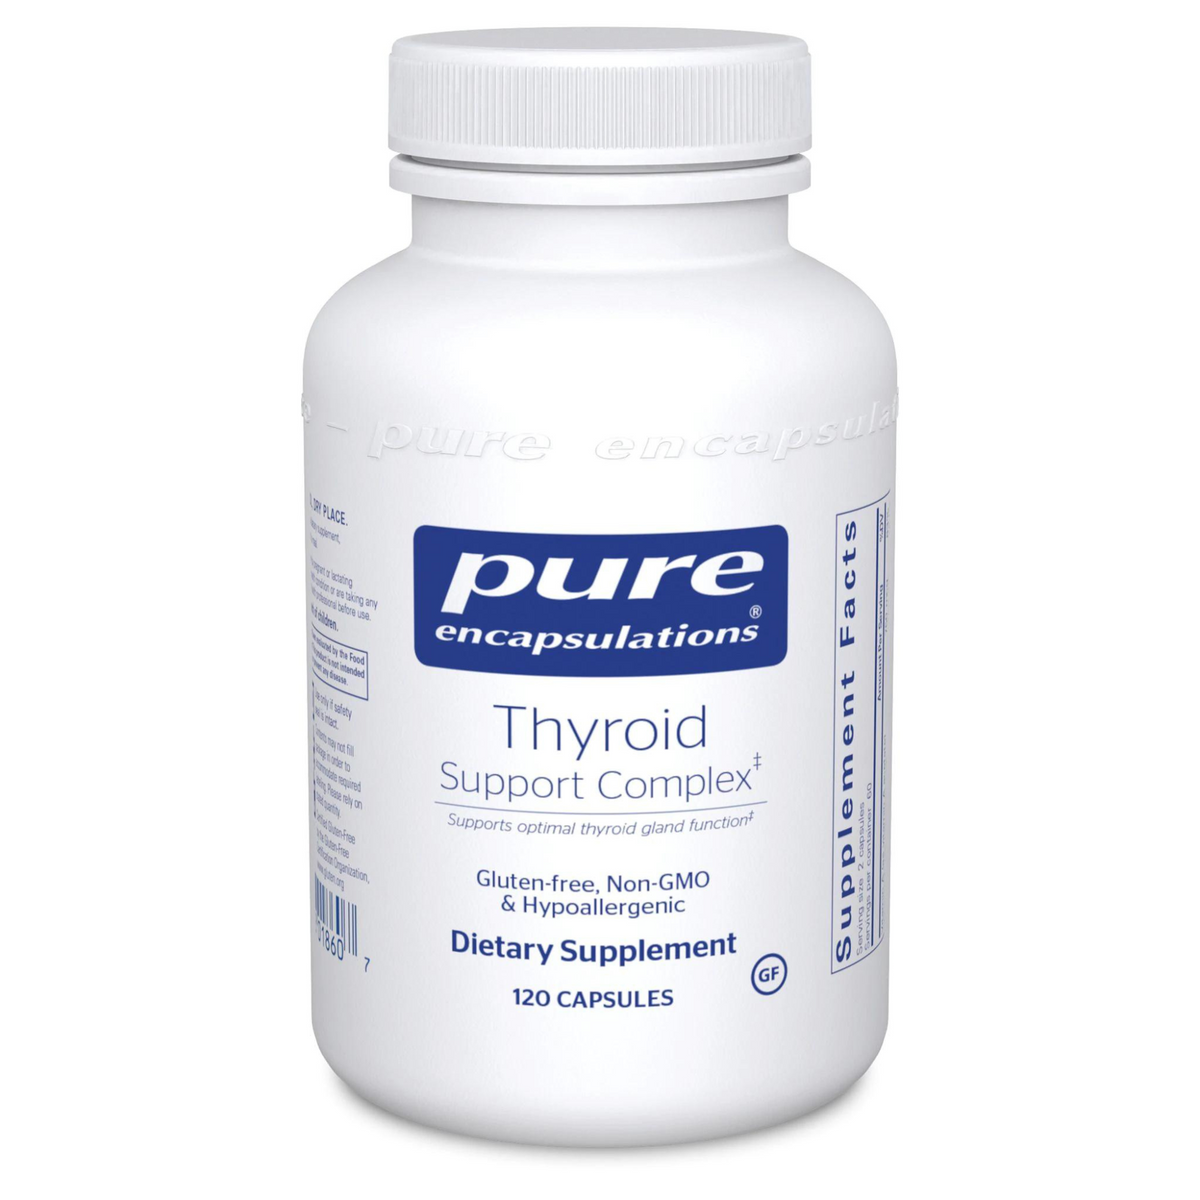 Primary Image of Thyroid Support Complex Capsules (120 count)